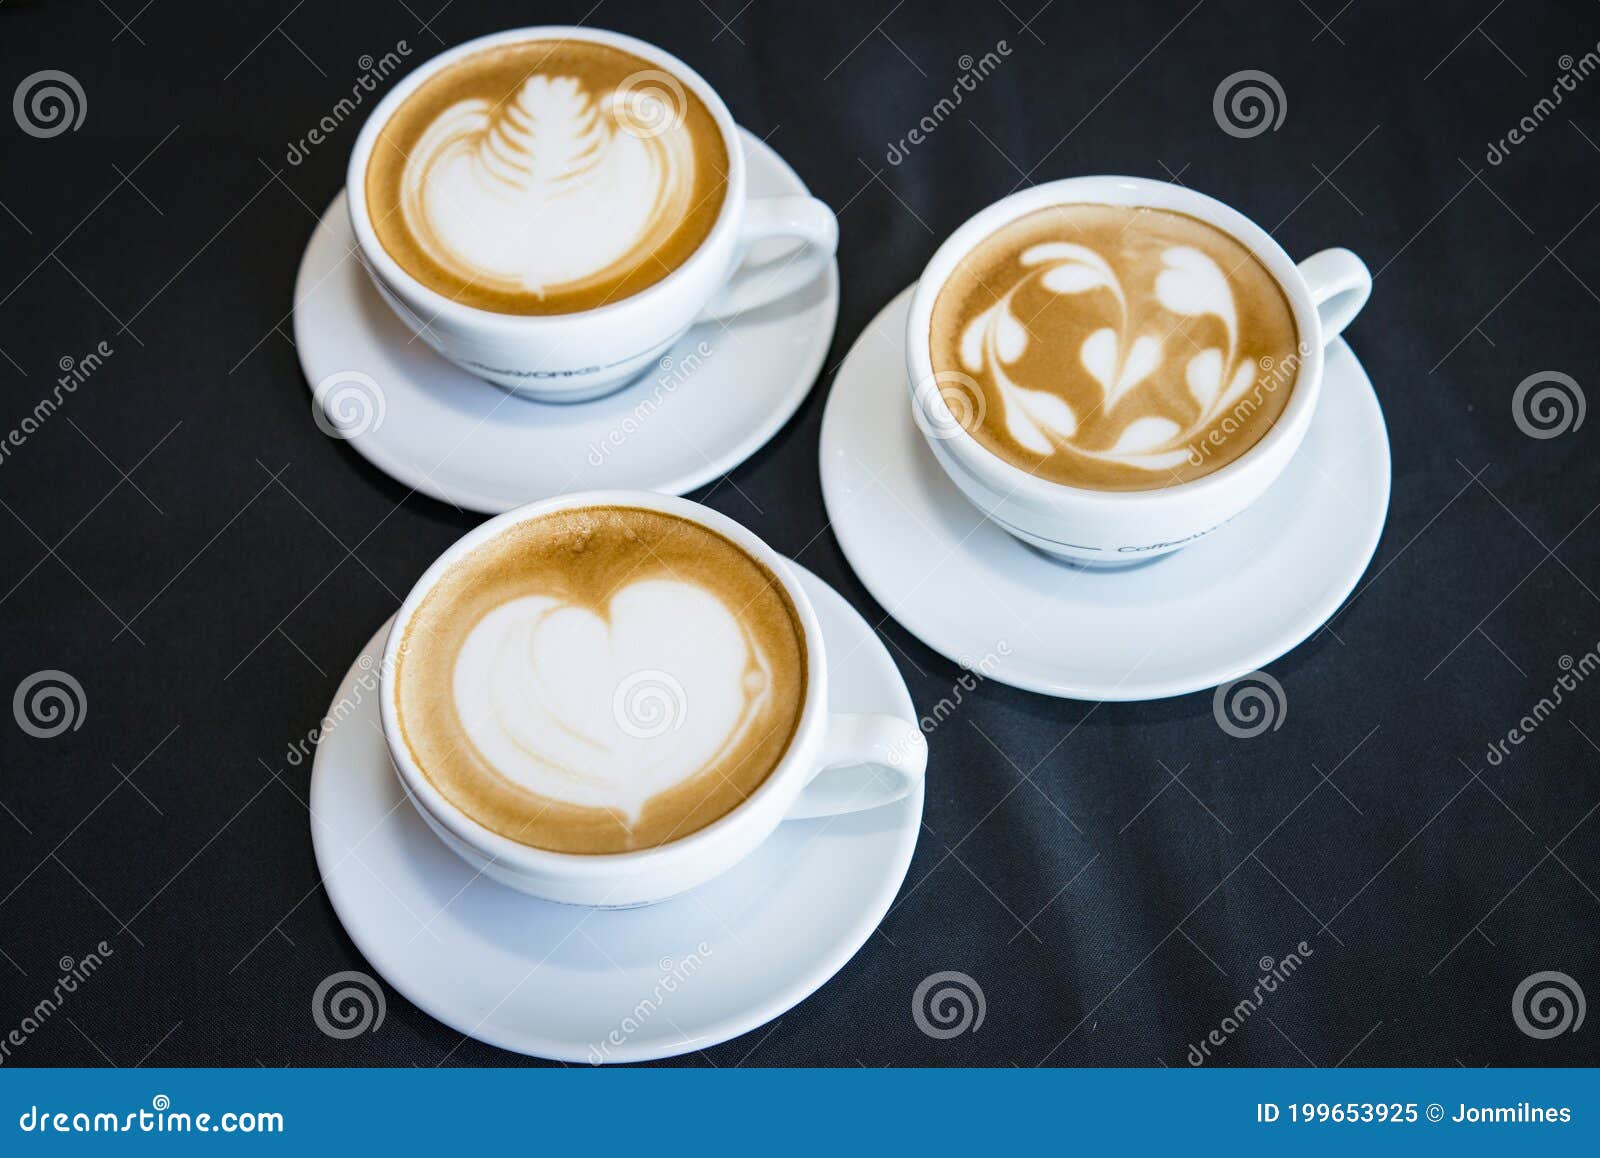 three cups of hot cappucino coffees